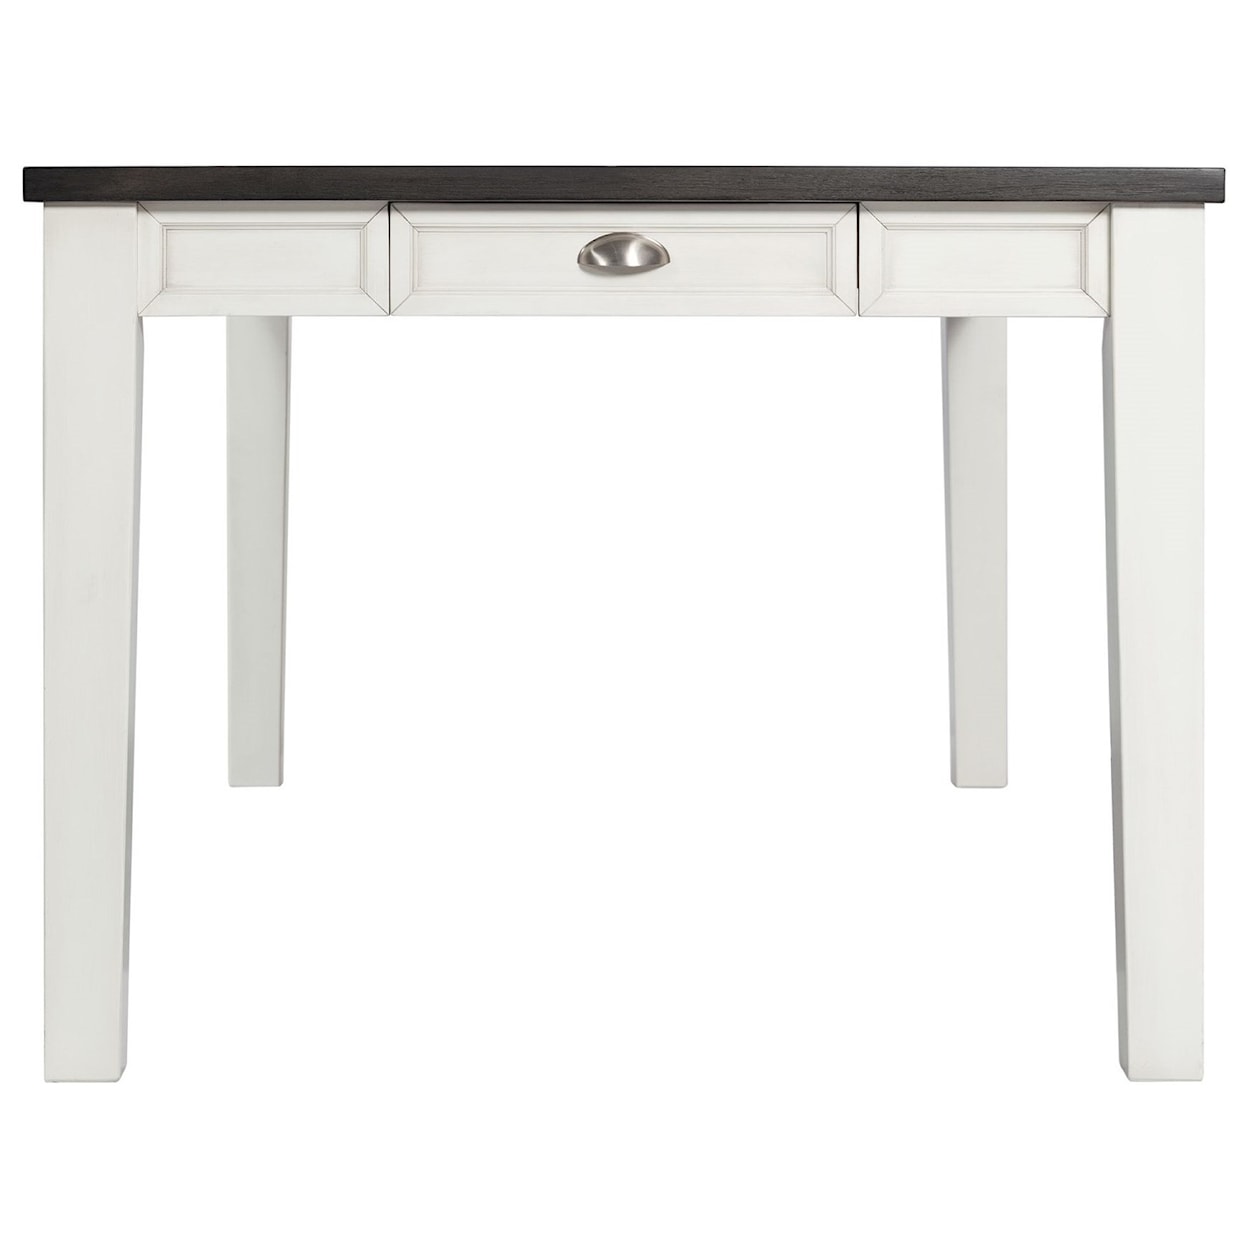 Elements Kayla Two-Tone Counter Height Dining Table